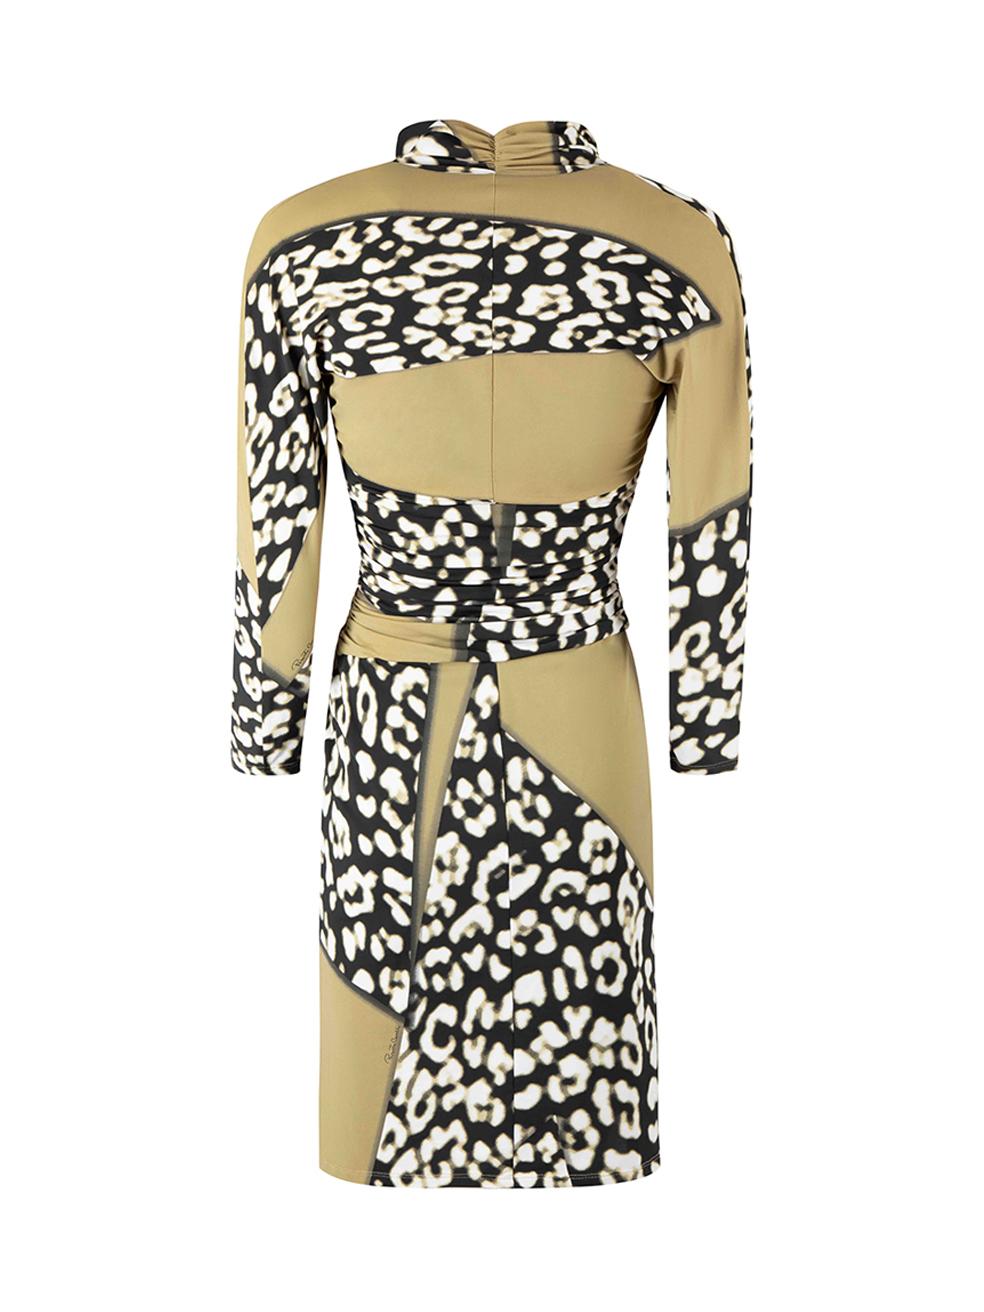 Khaki Two Tone Animal Print Knee Length Dress Size S In Good Condition For Sale In London, GB